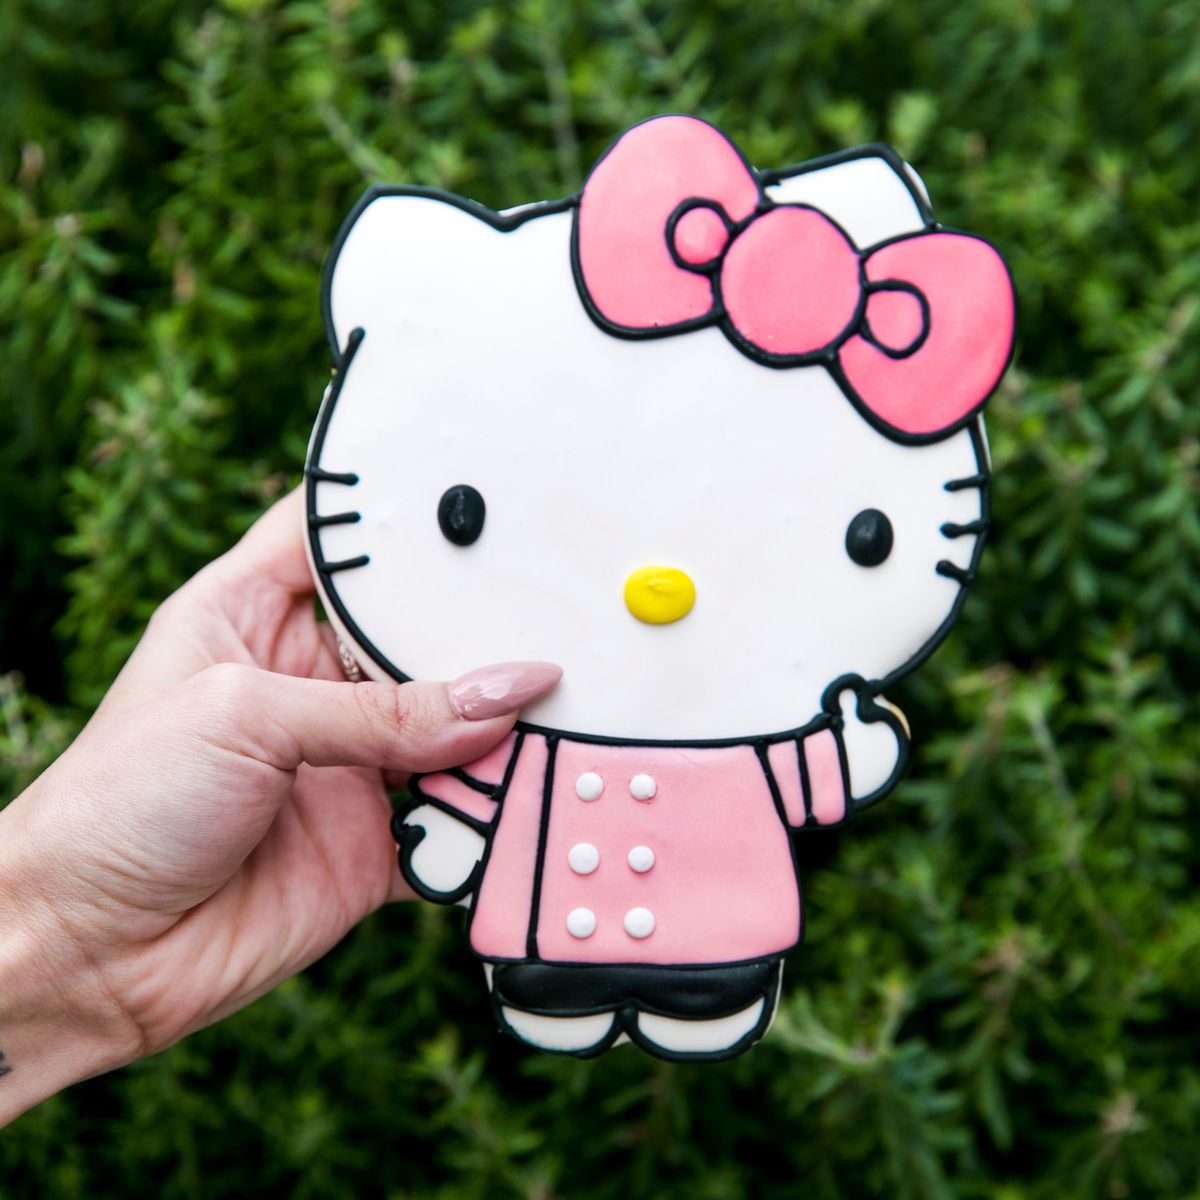 A hand holds a giant frosted cookie decorated like Hello Kitty.